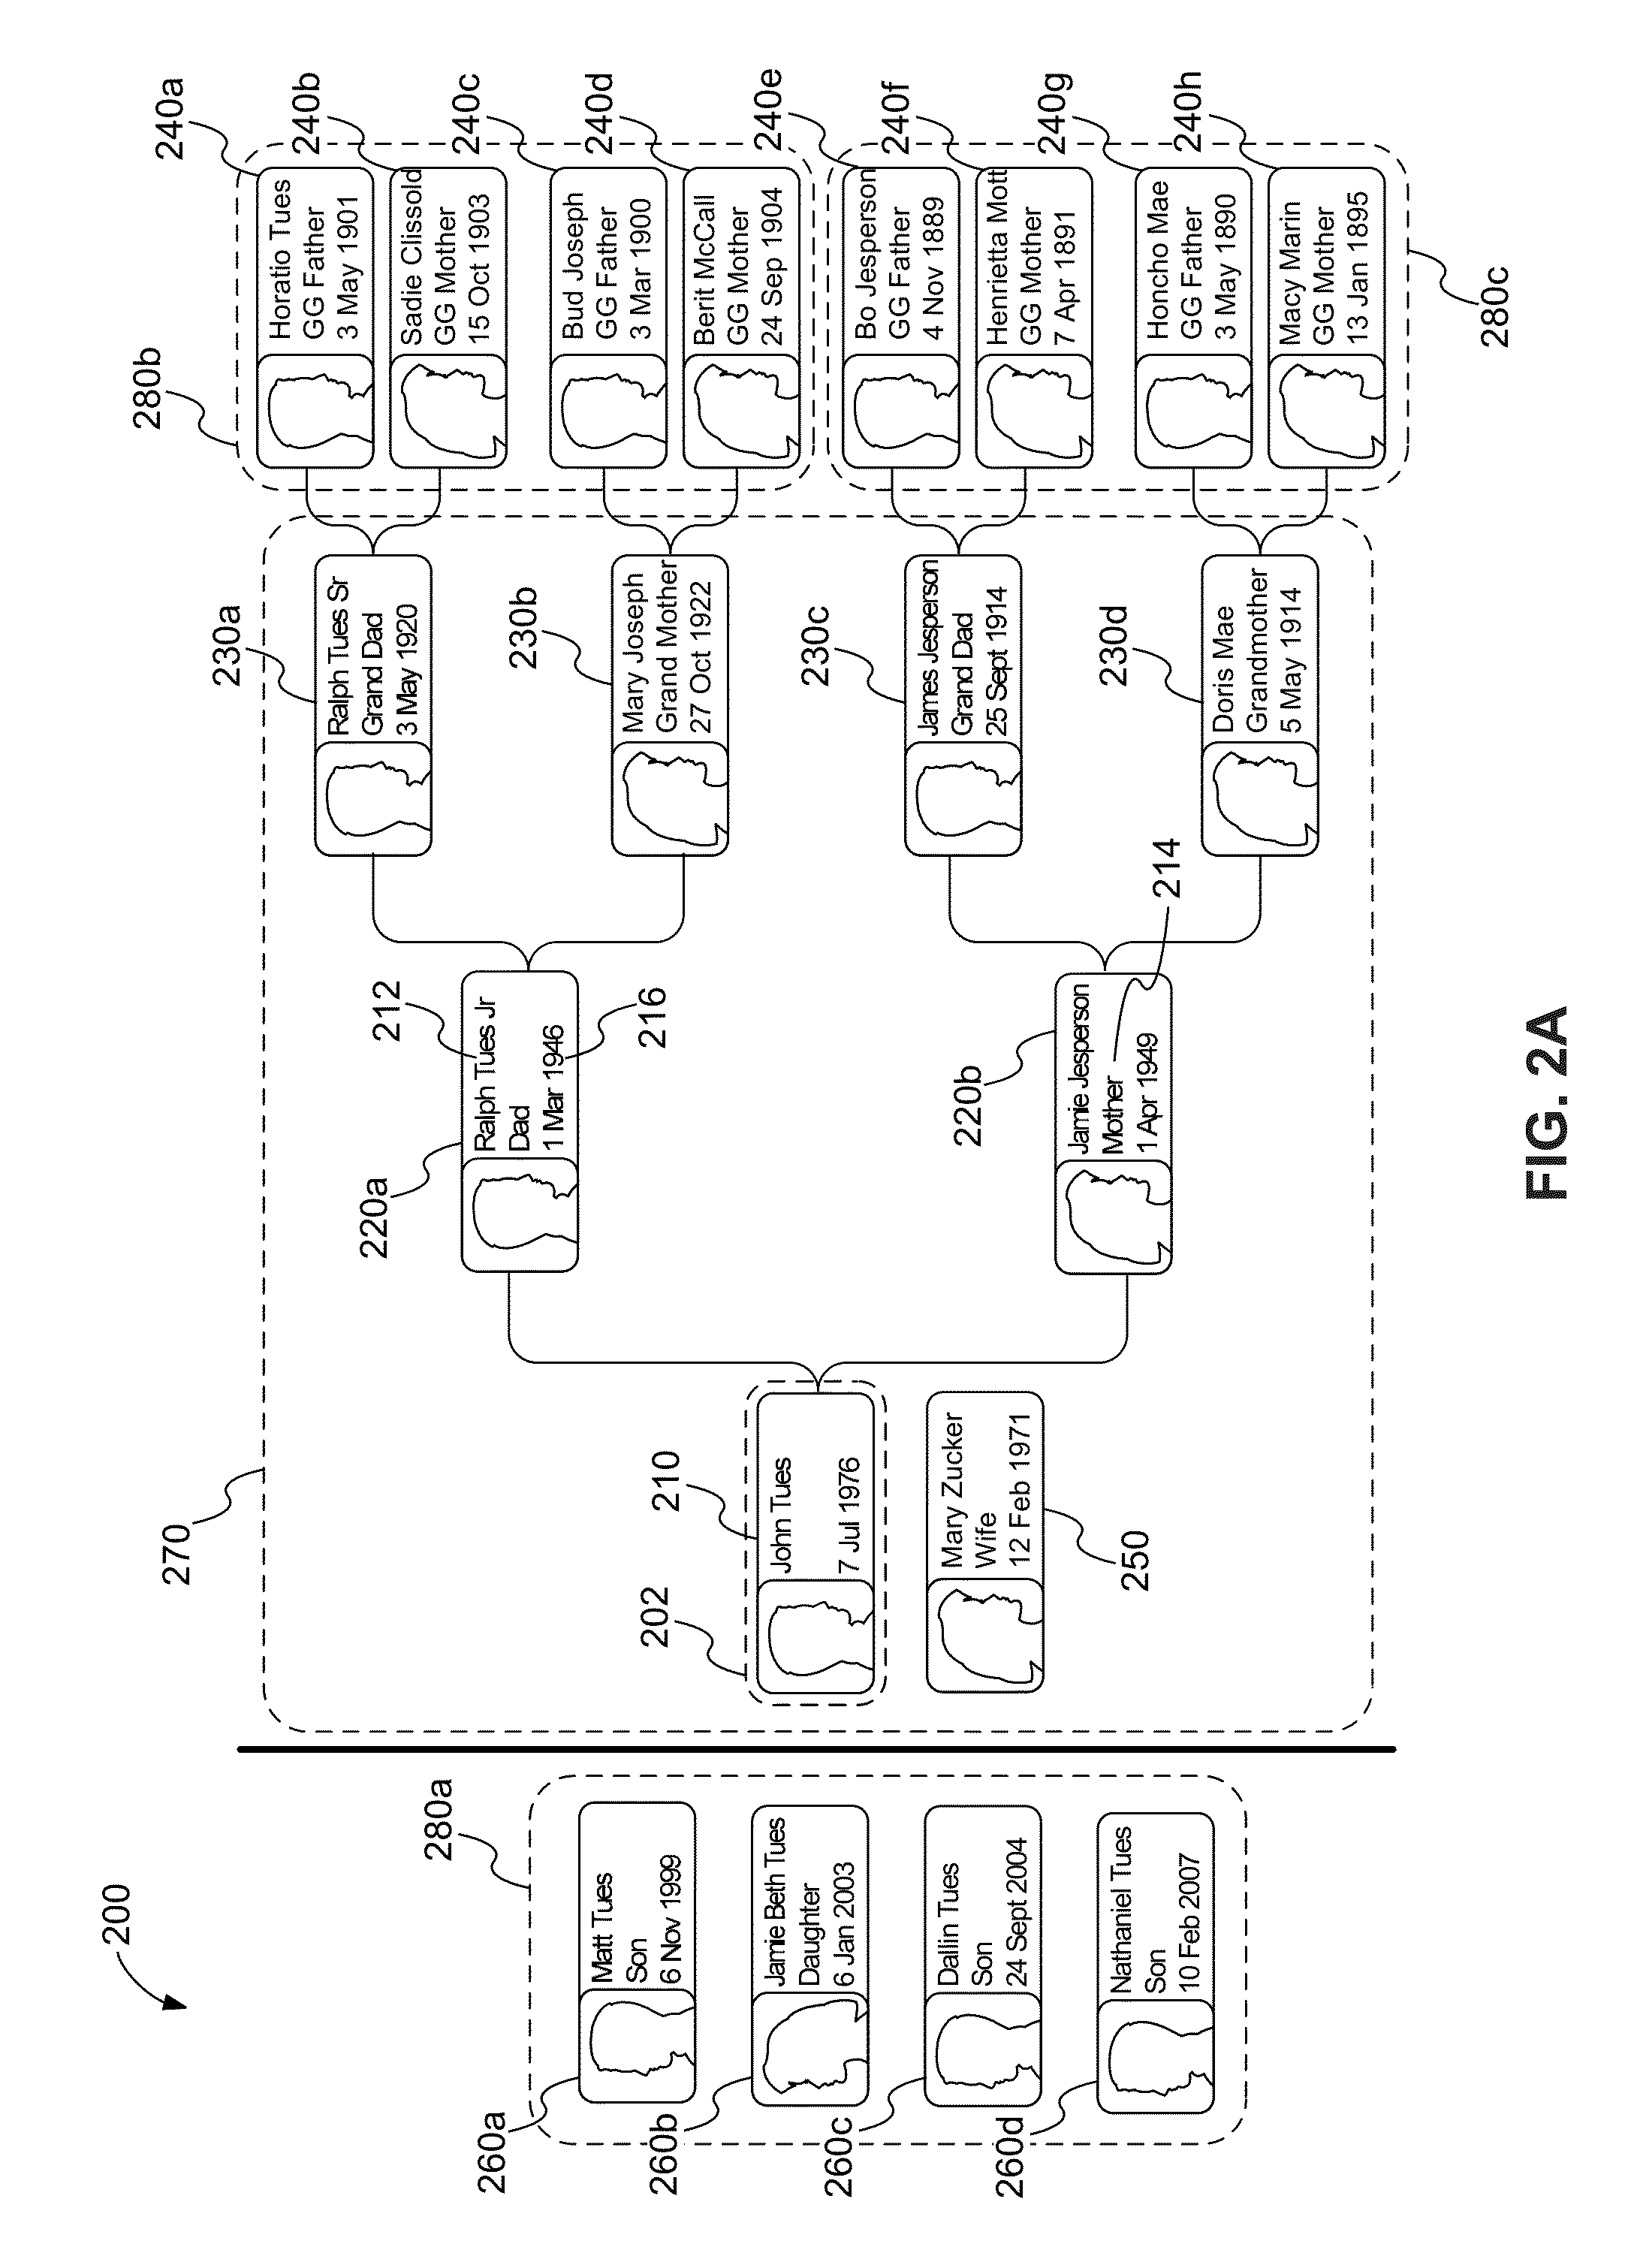 Methods and system for displaying pedigree charts on a touch device